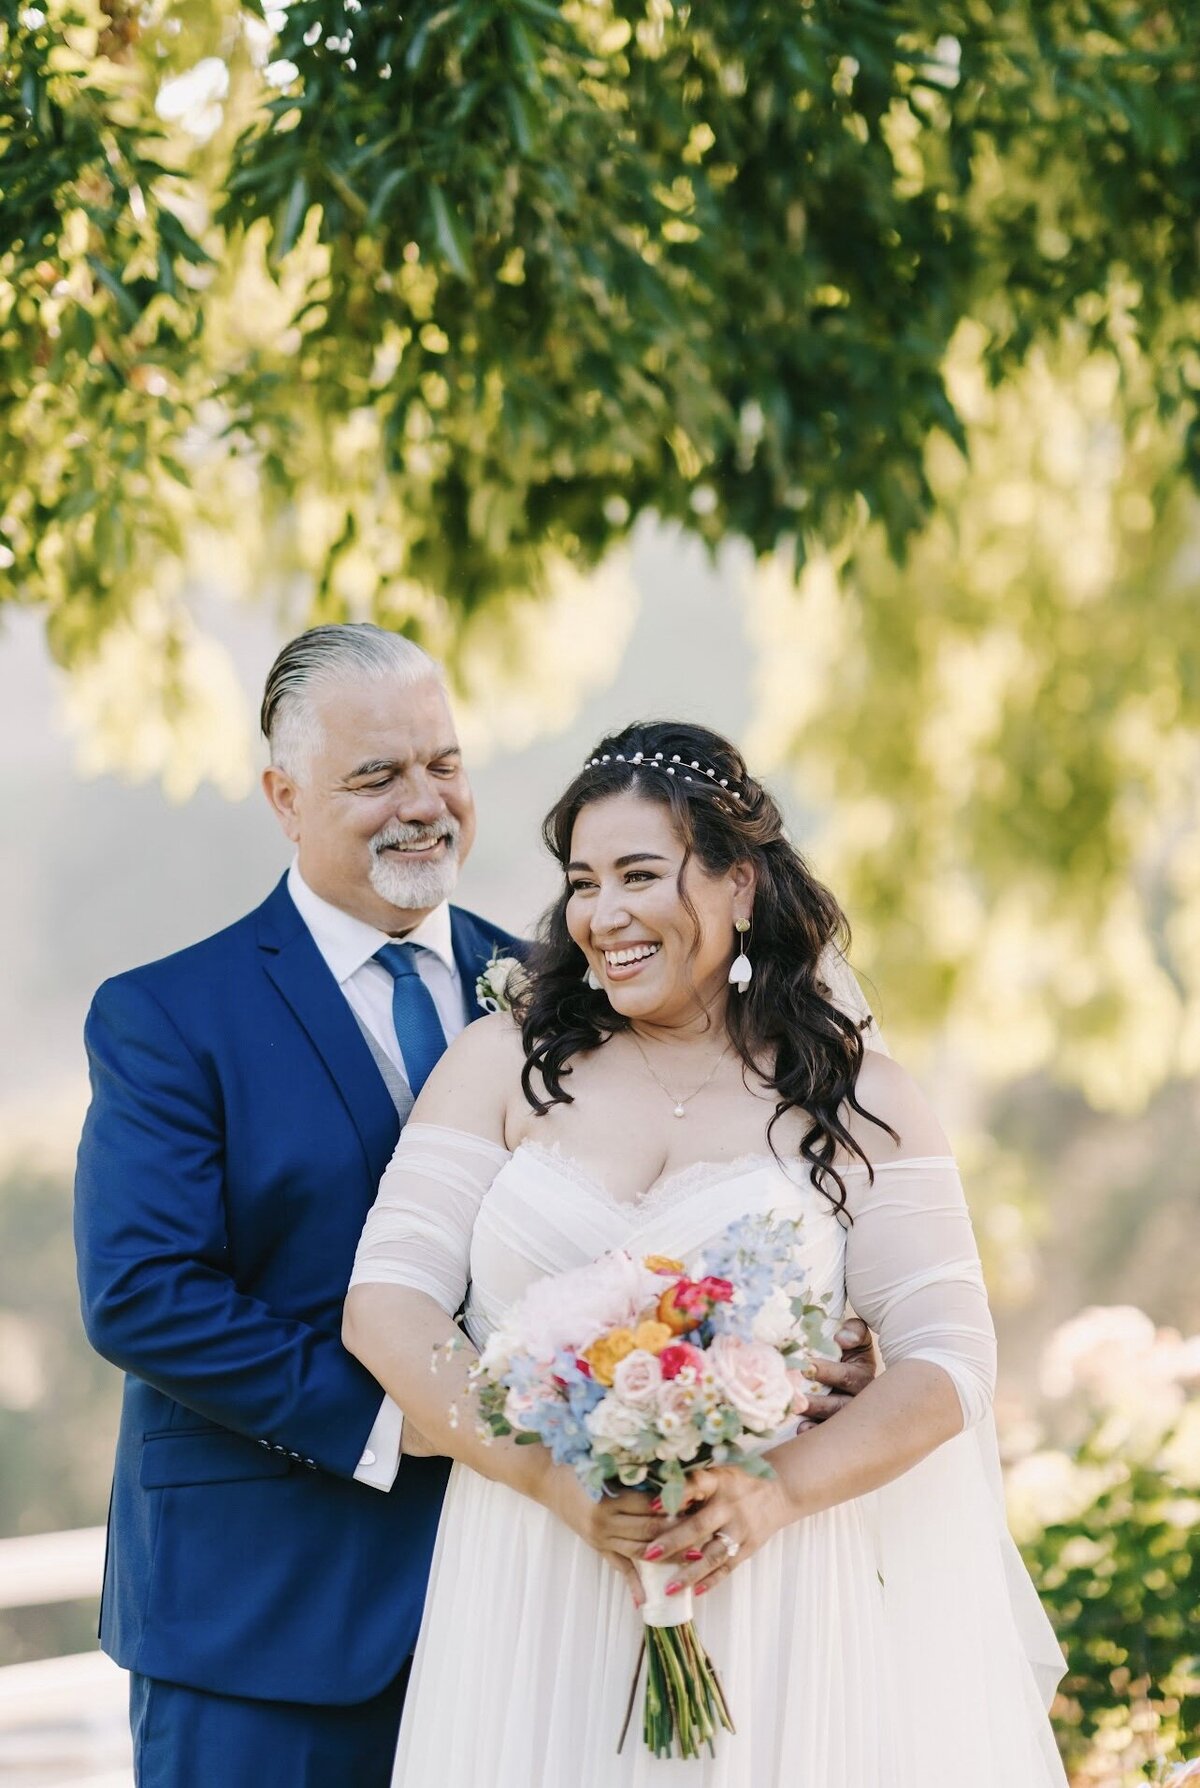 A bride stands in an outdoor setting with  her father